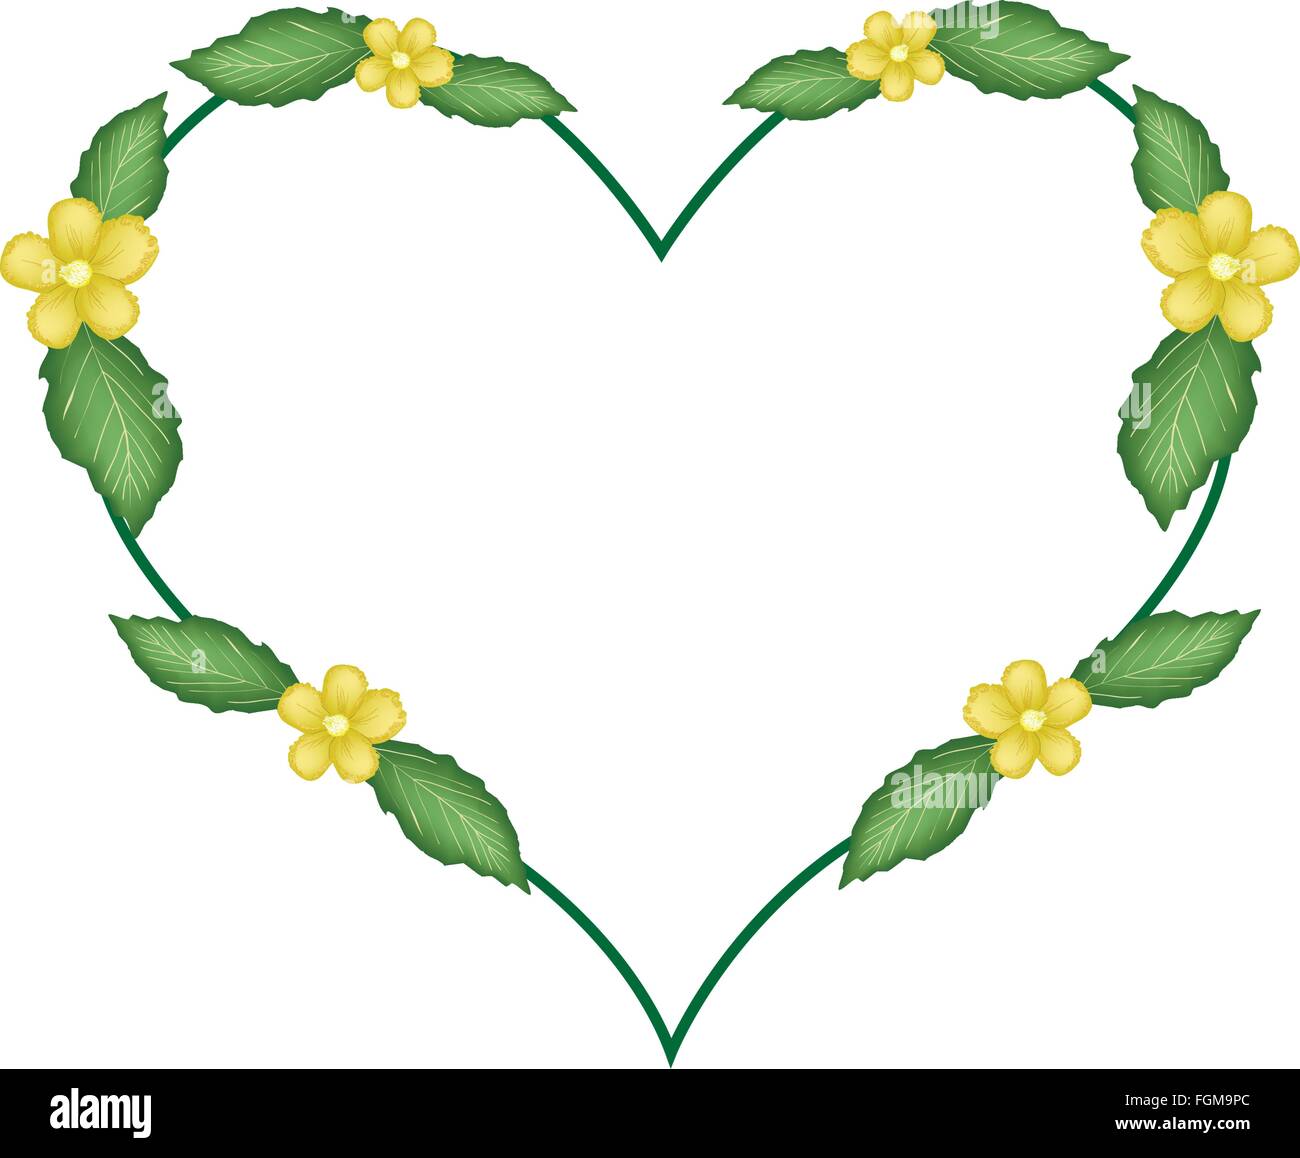 Love Concept, Illustration of Simpor Flowers or Dillenia Flowers Forming in Heart Shape Isolated on White Background. Stock Vector